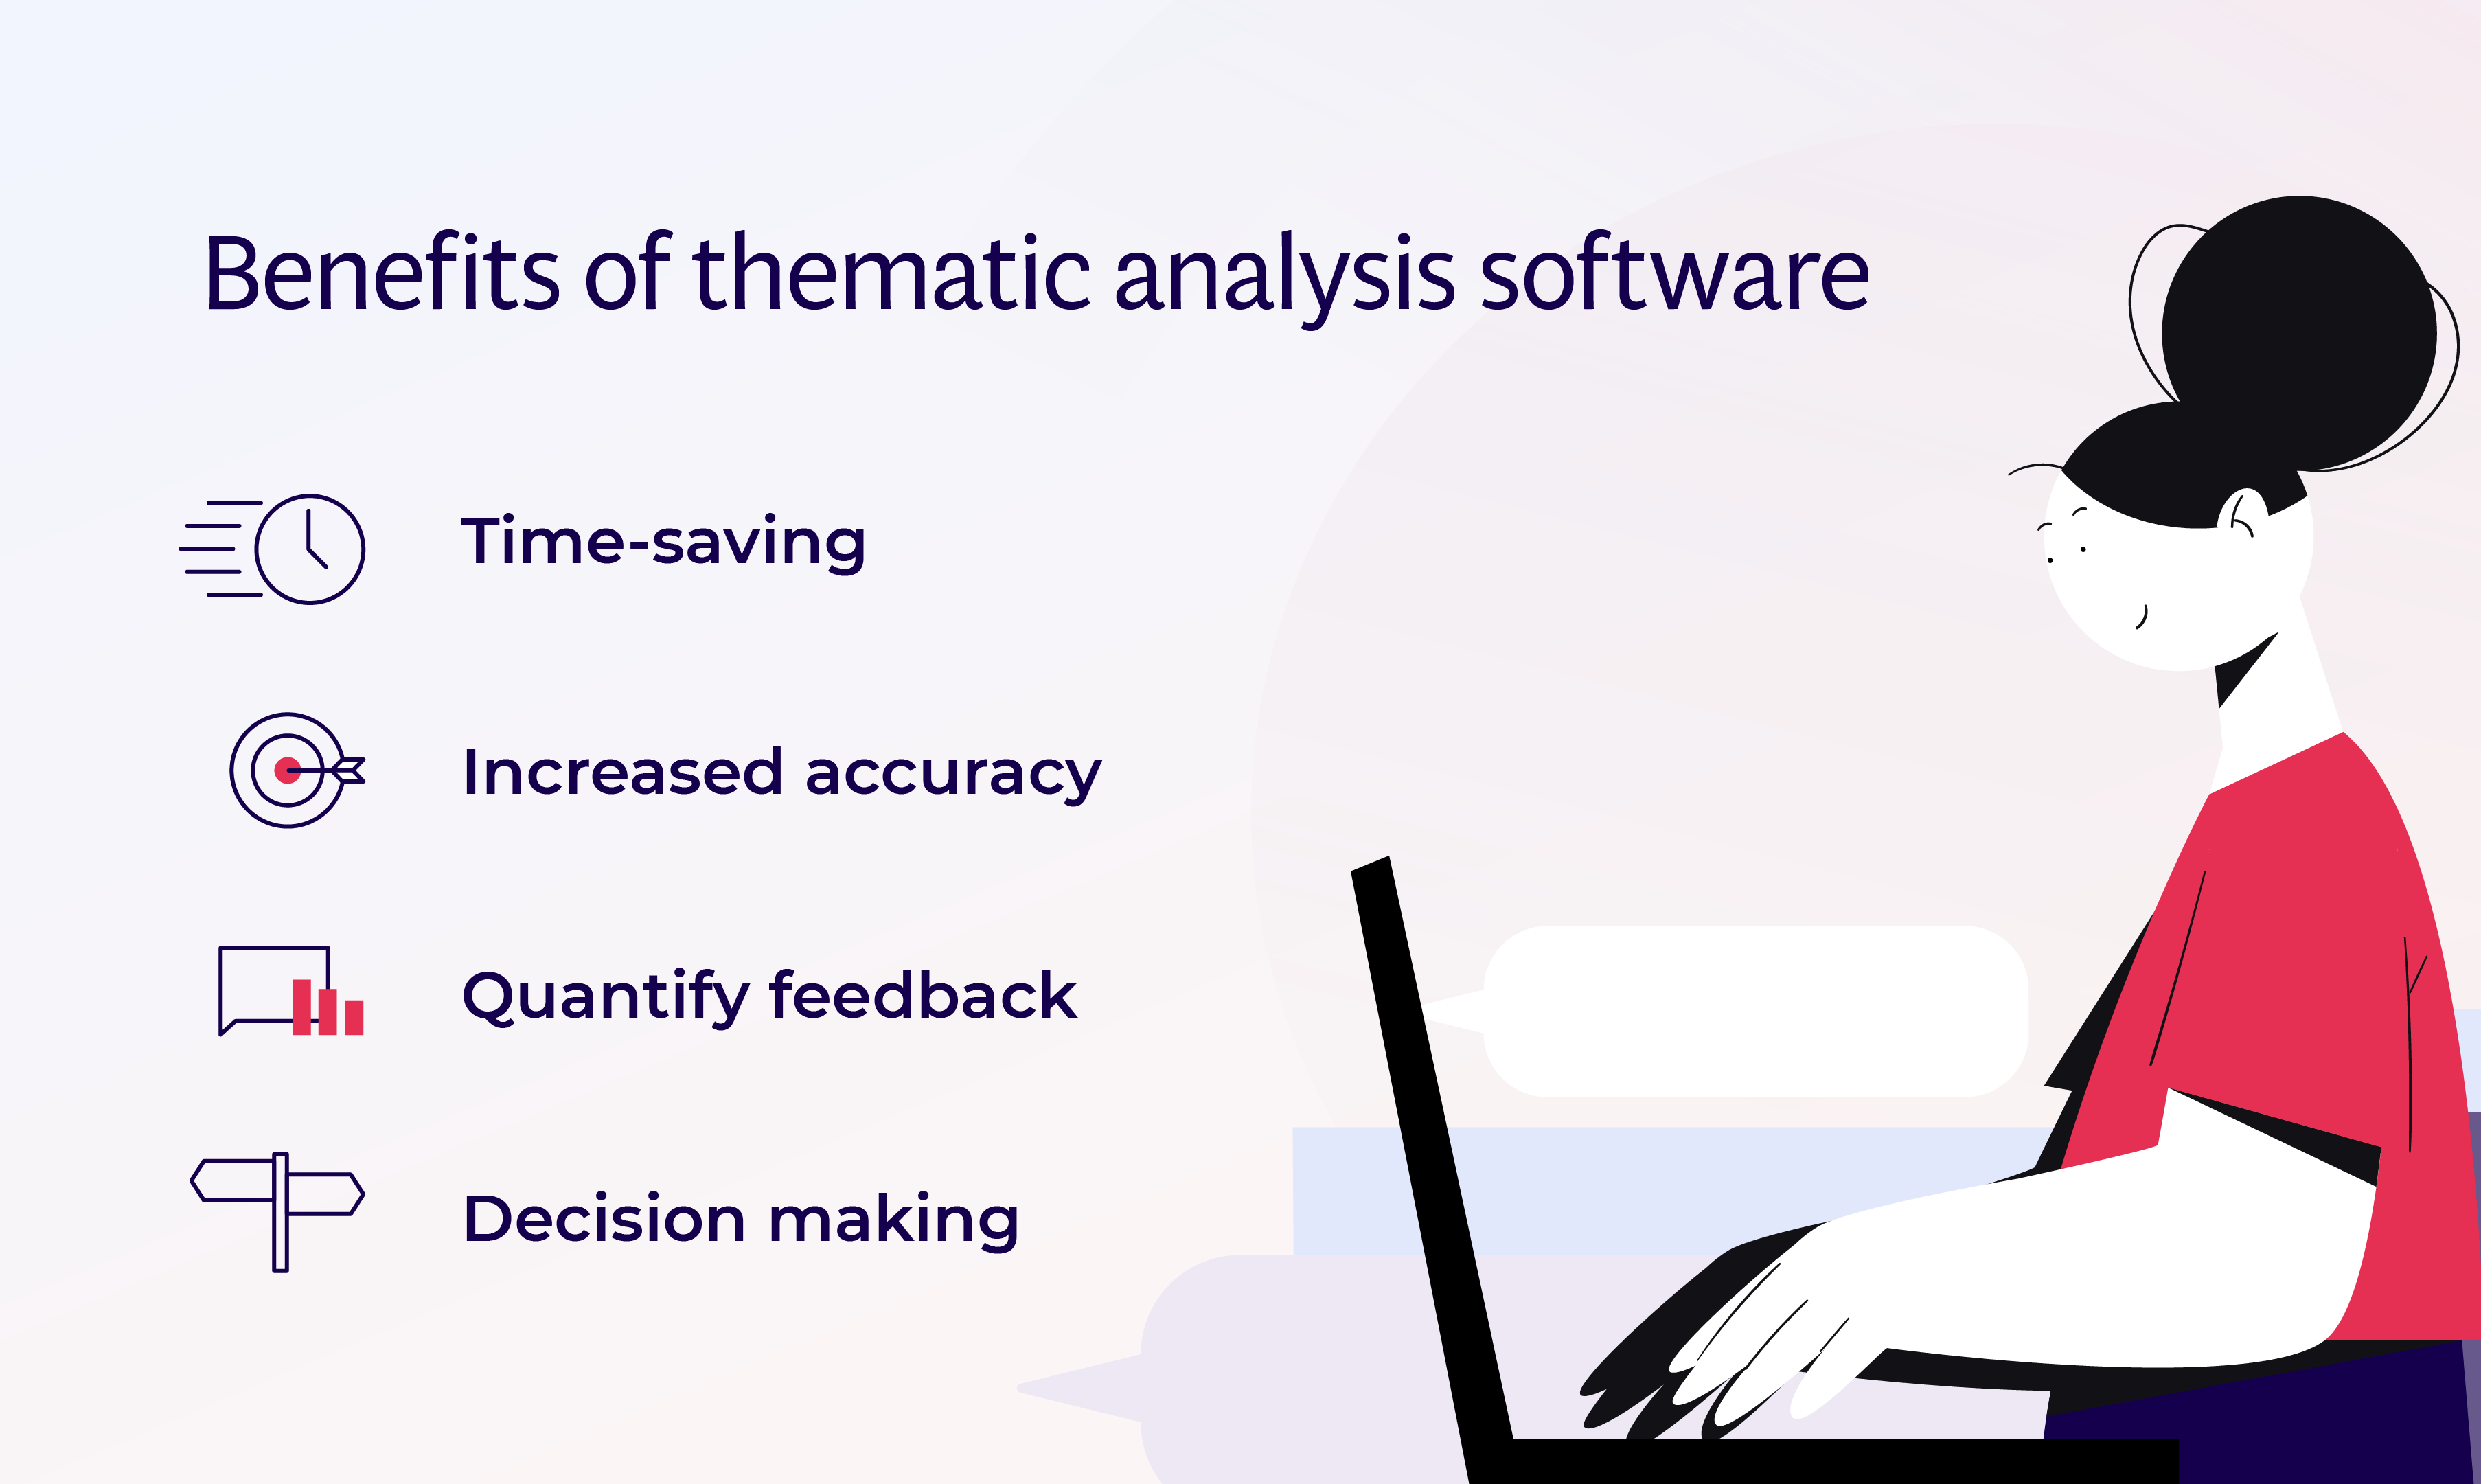 Benefits of thematic analysis software: Time-saving, Increases accuracy, Quantify feedback, decision making